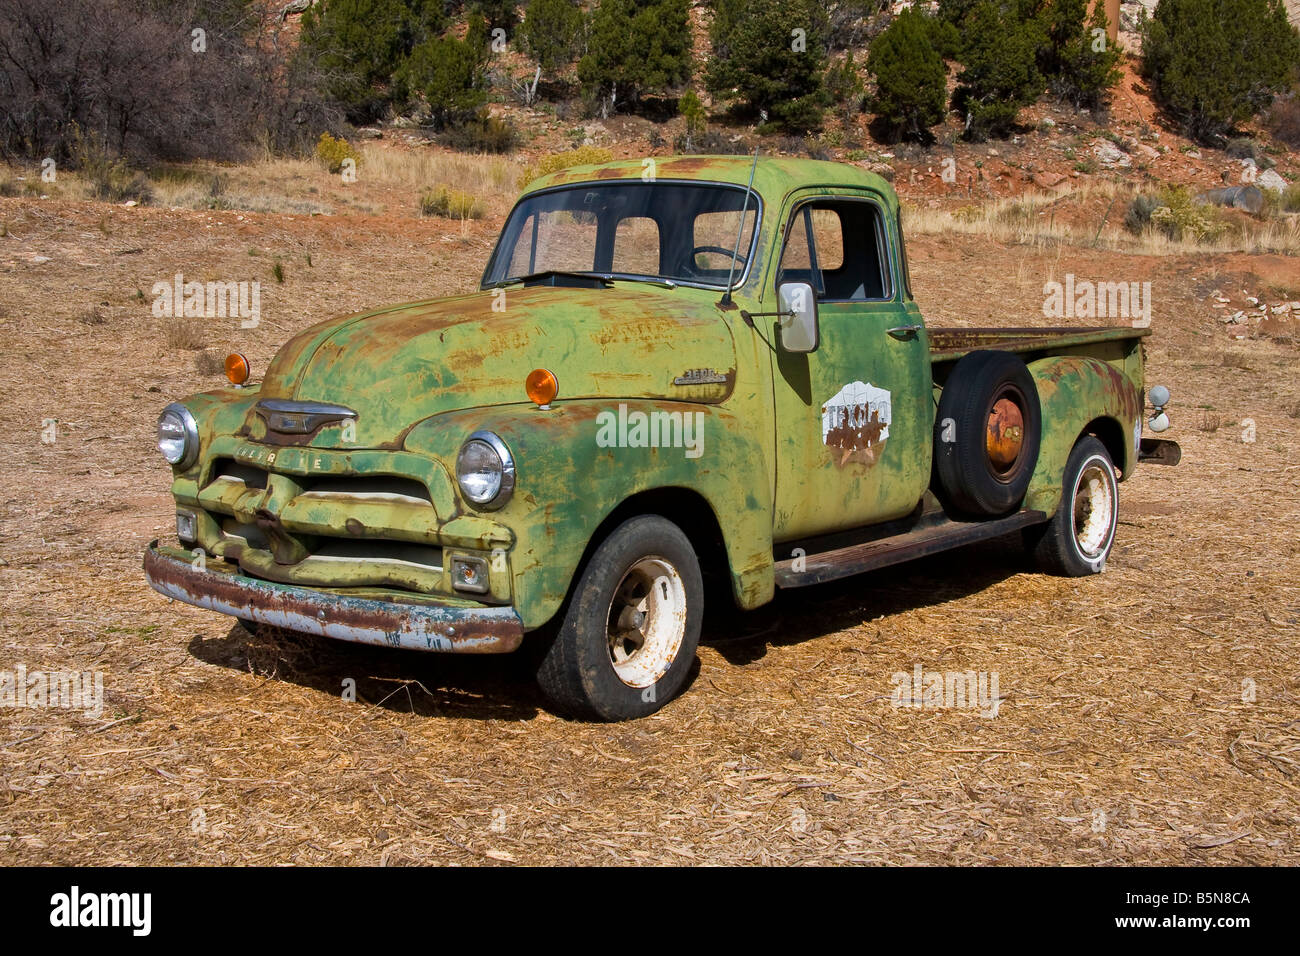 An old distressed but still running Chevy truck Stock Photo